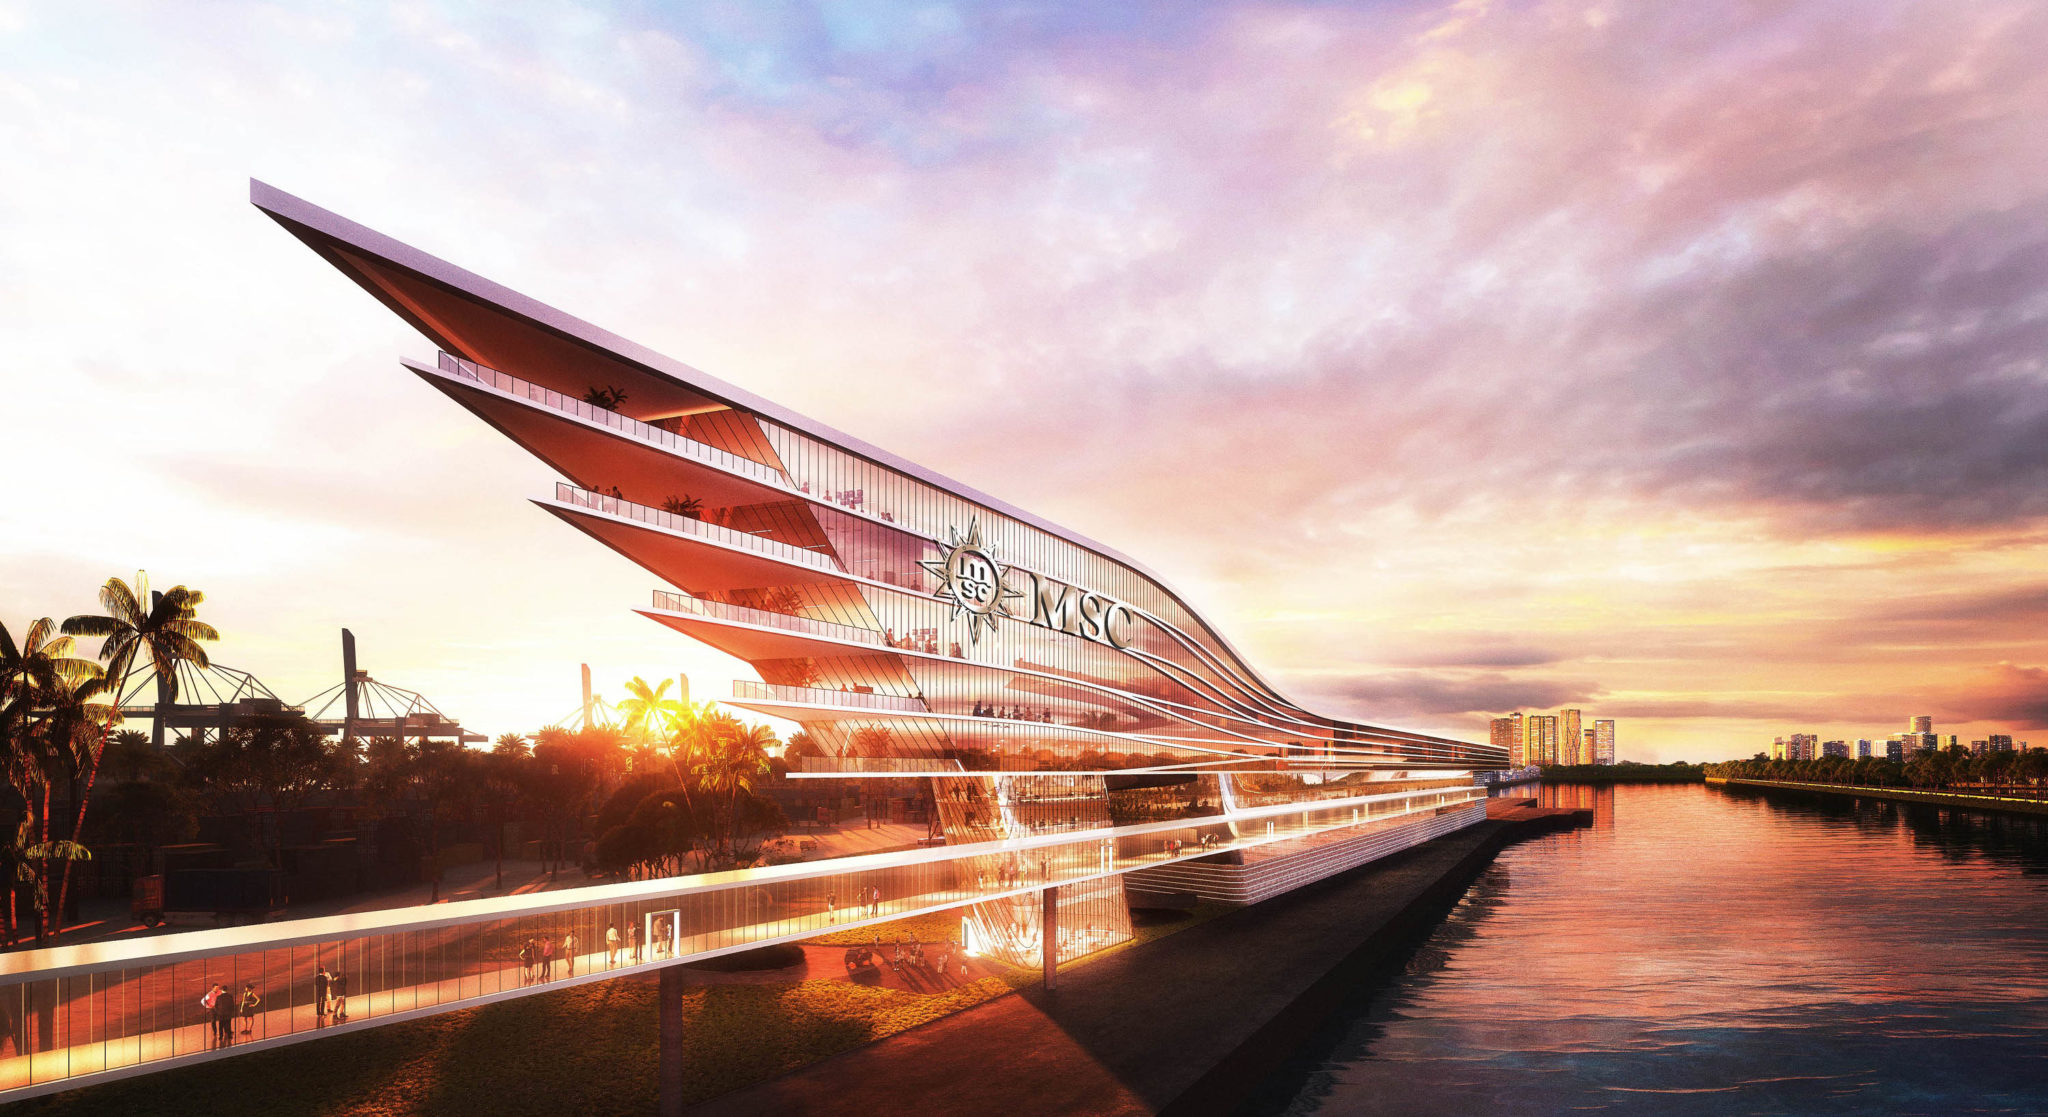 PortMiami is undergoing a historic renovation with multiple new terminals and developments